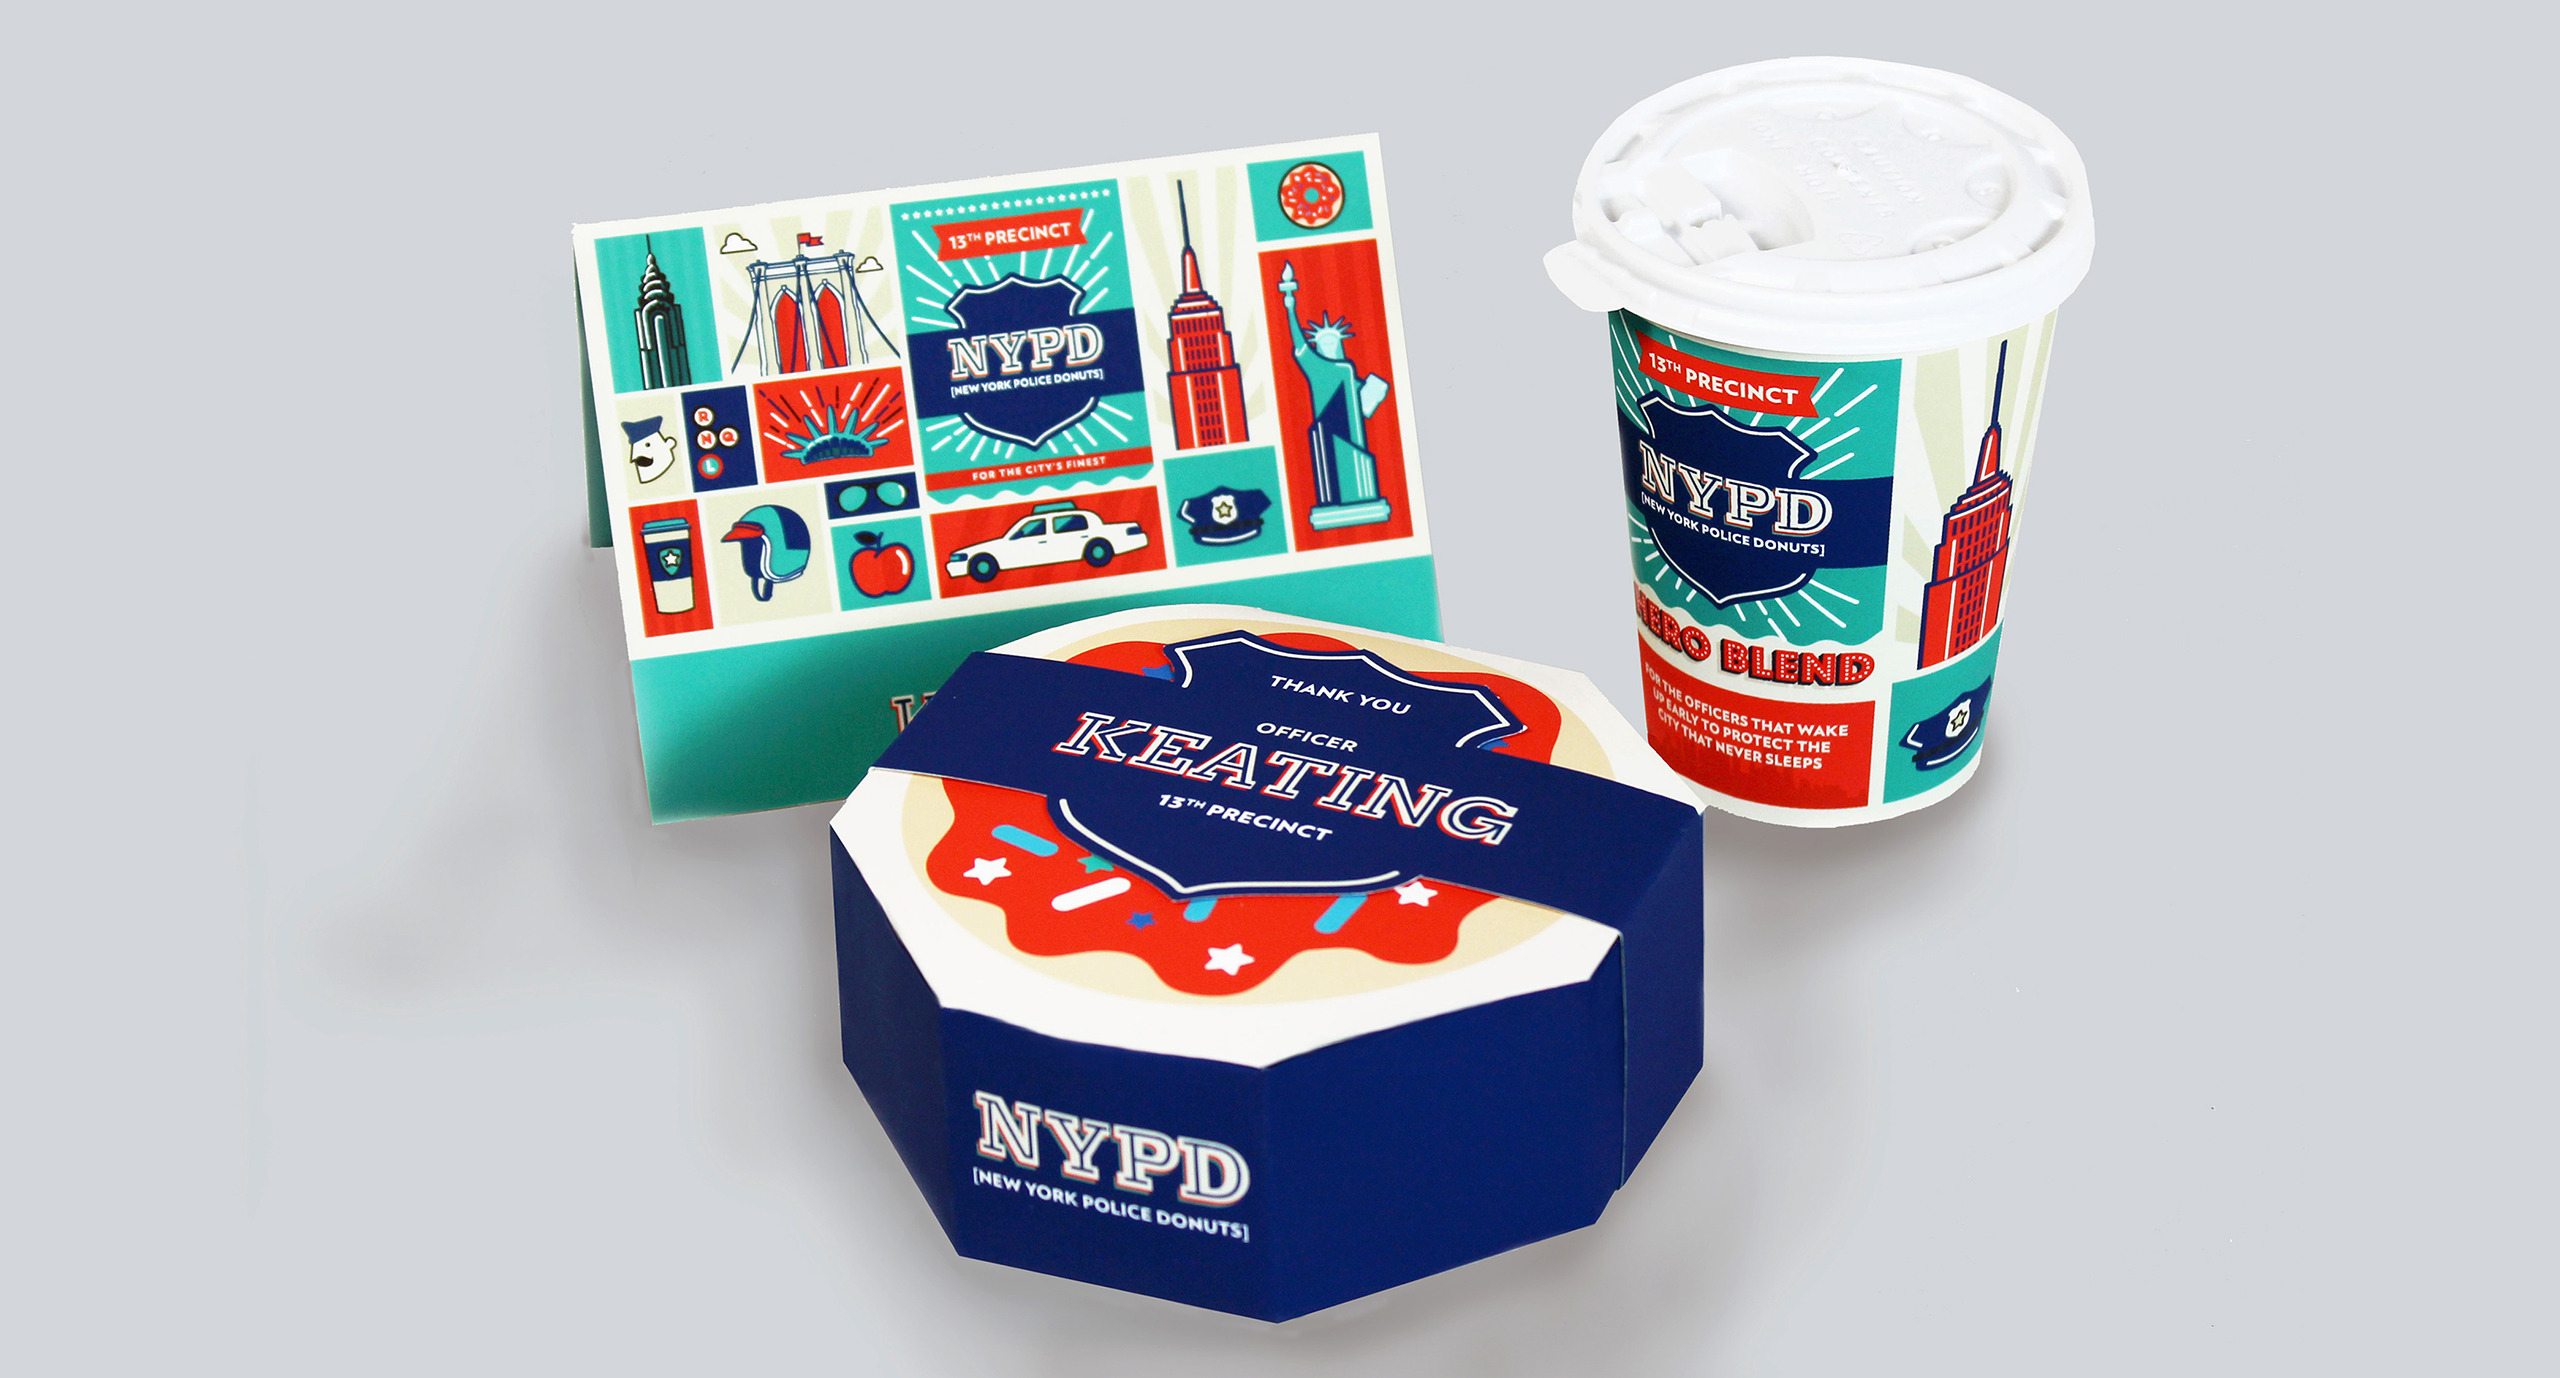 A card, a cardbox and a plastic cup of coffee, each having drawings of New York landmarks and the New York Police Department logo.